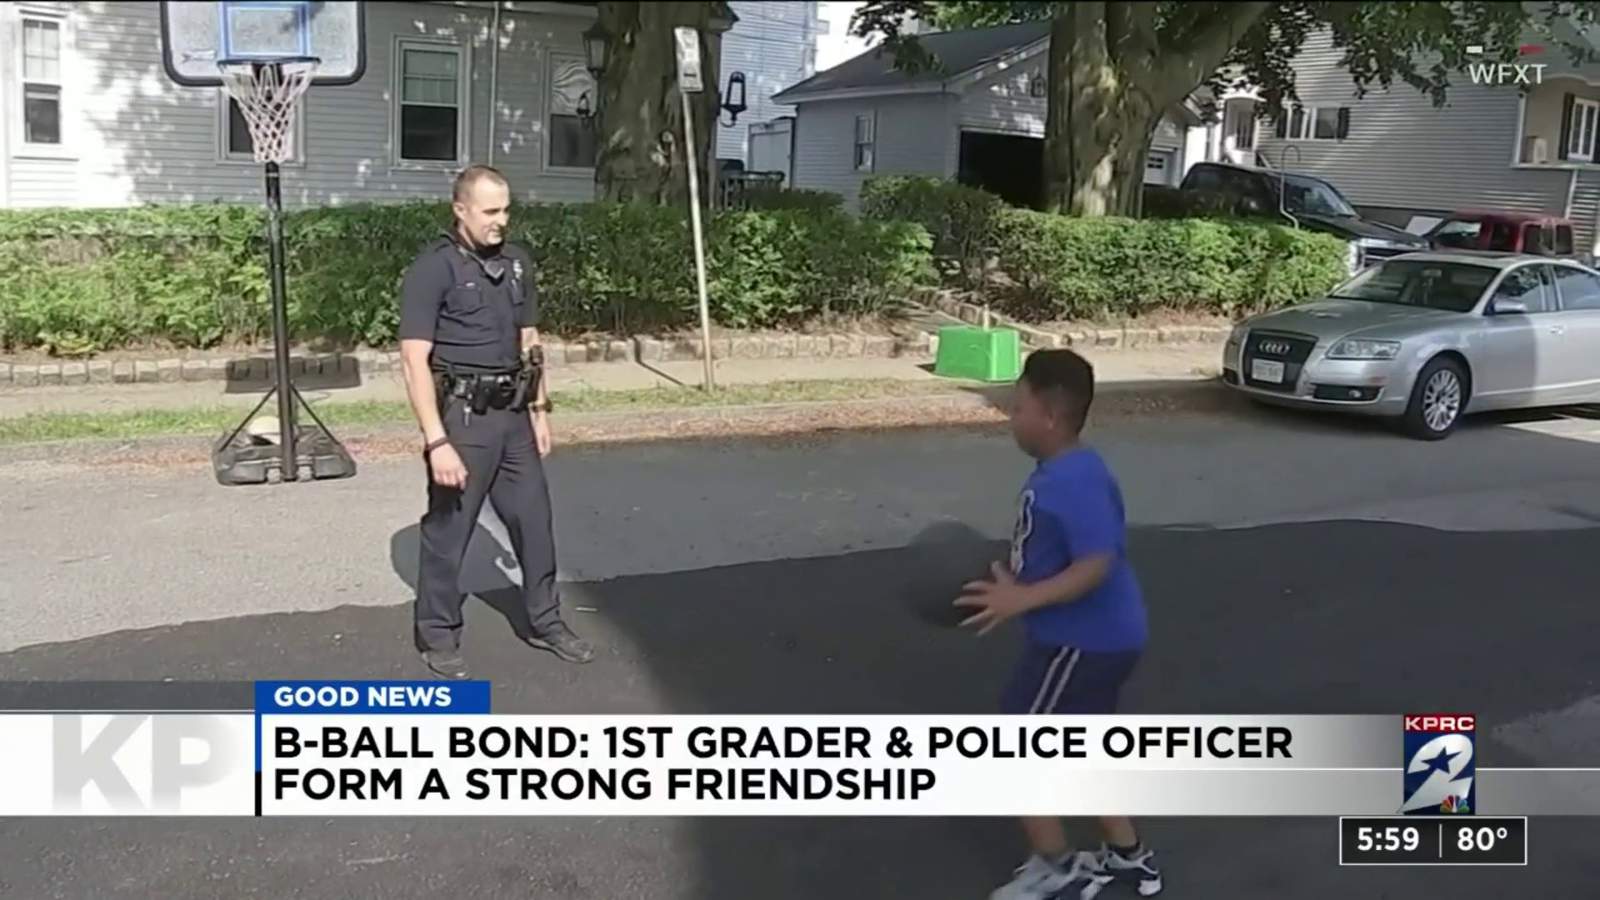 One Good Thing: First grader and police officer form a friendship through basketball